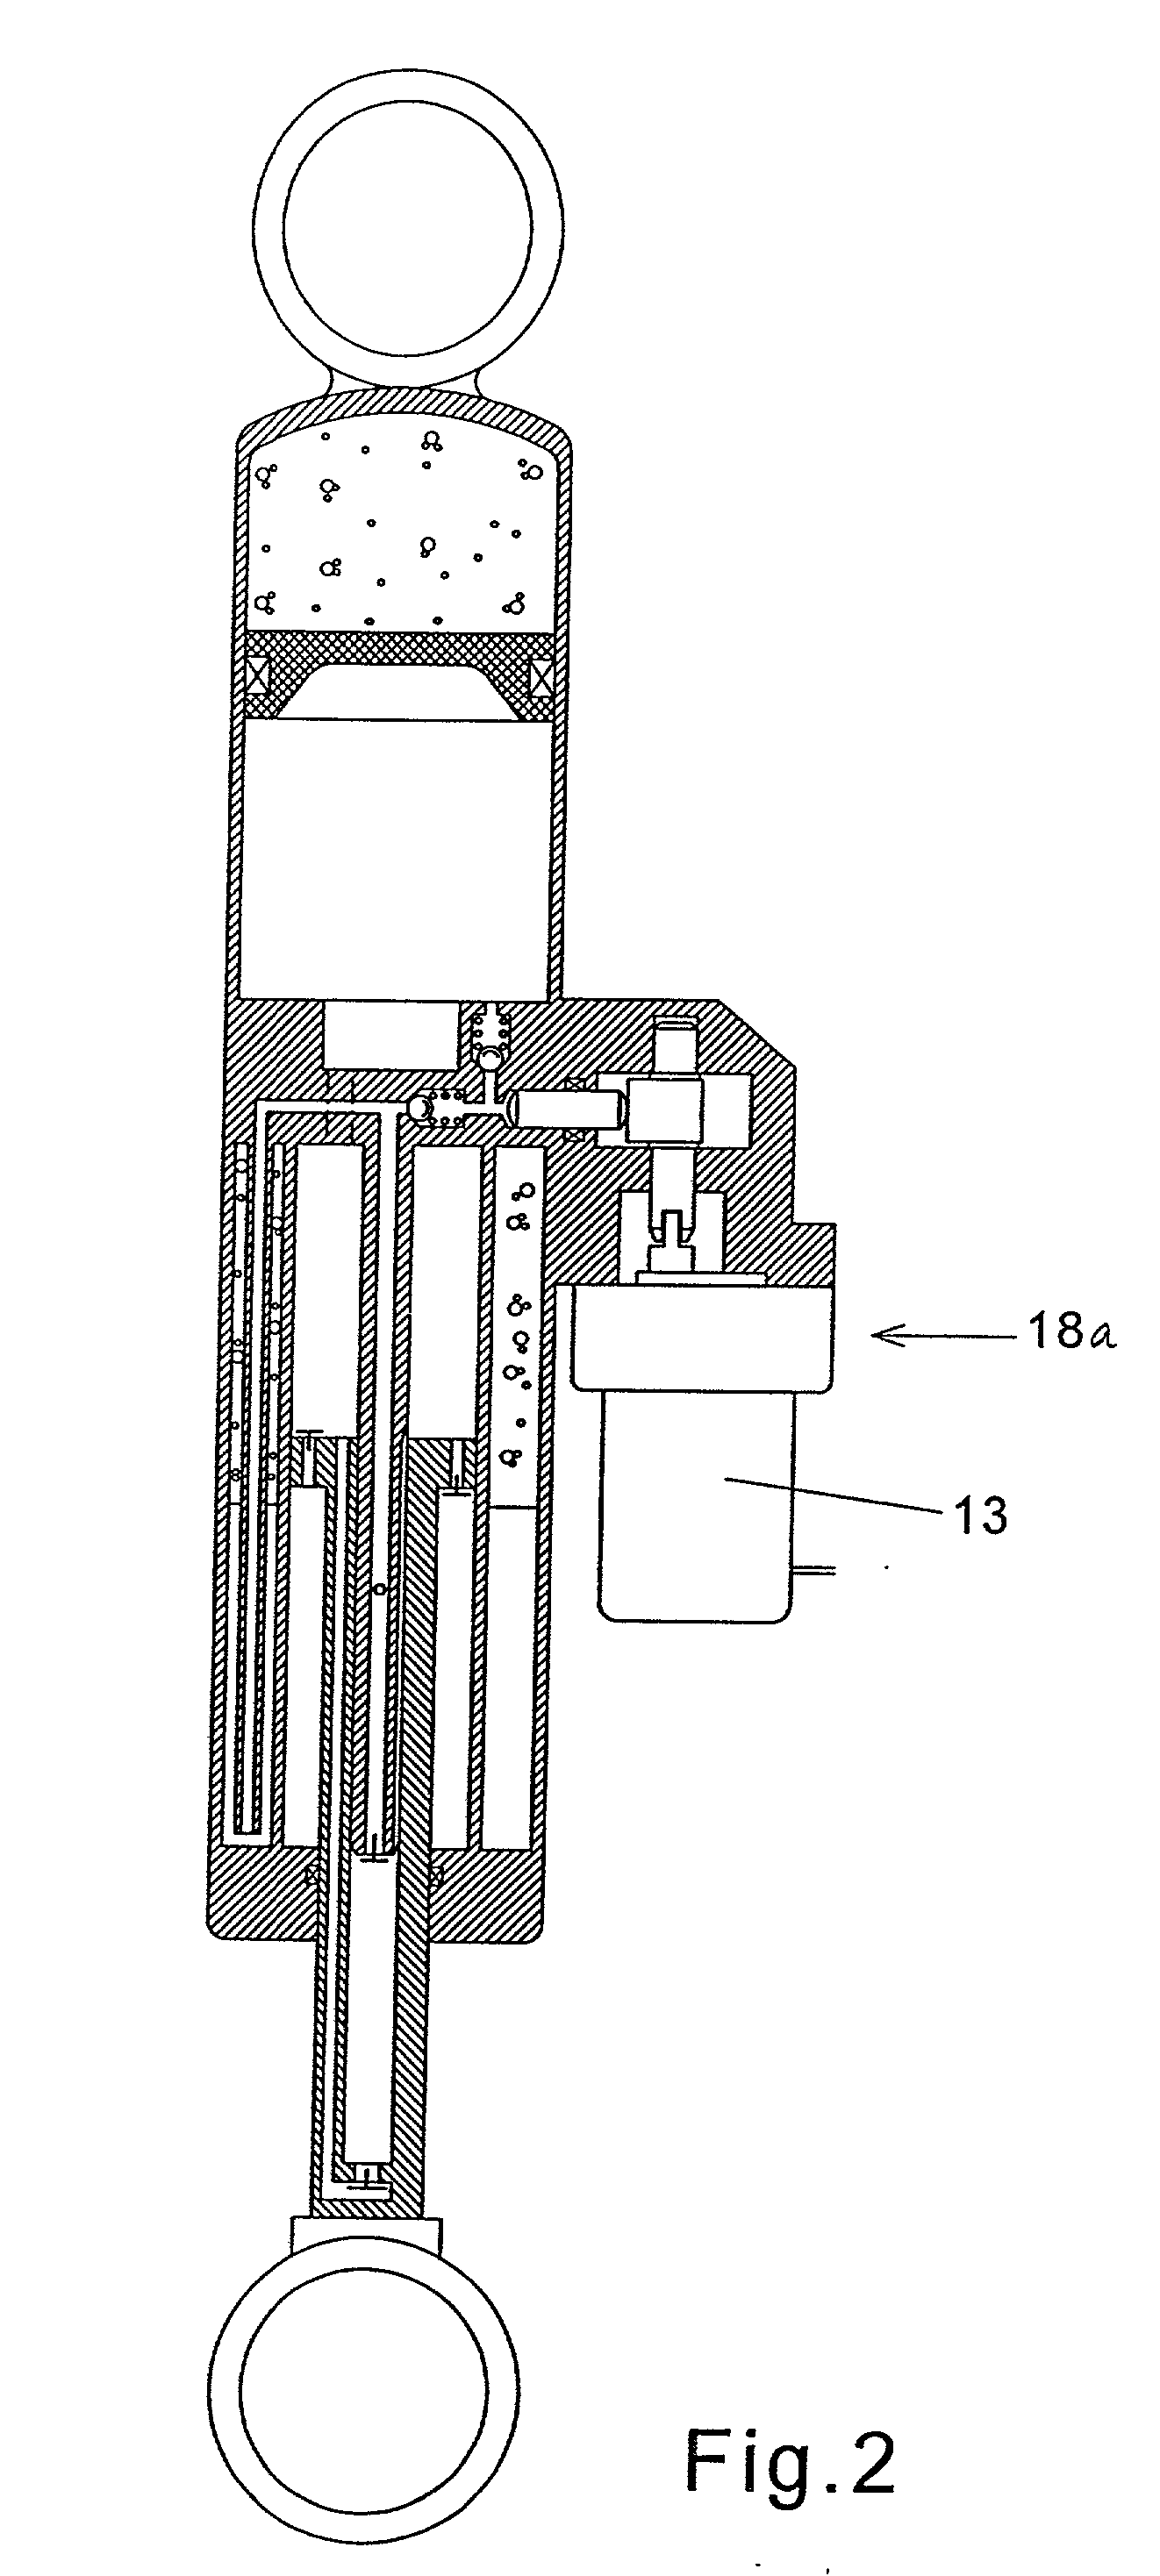 Self-pumping hydropneumatic spring strut with internal leveling